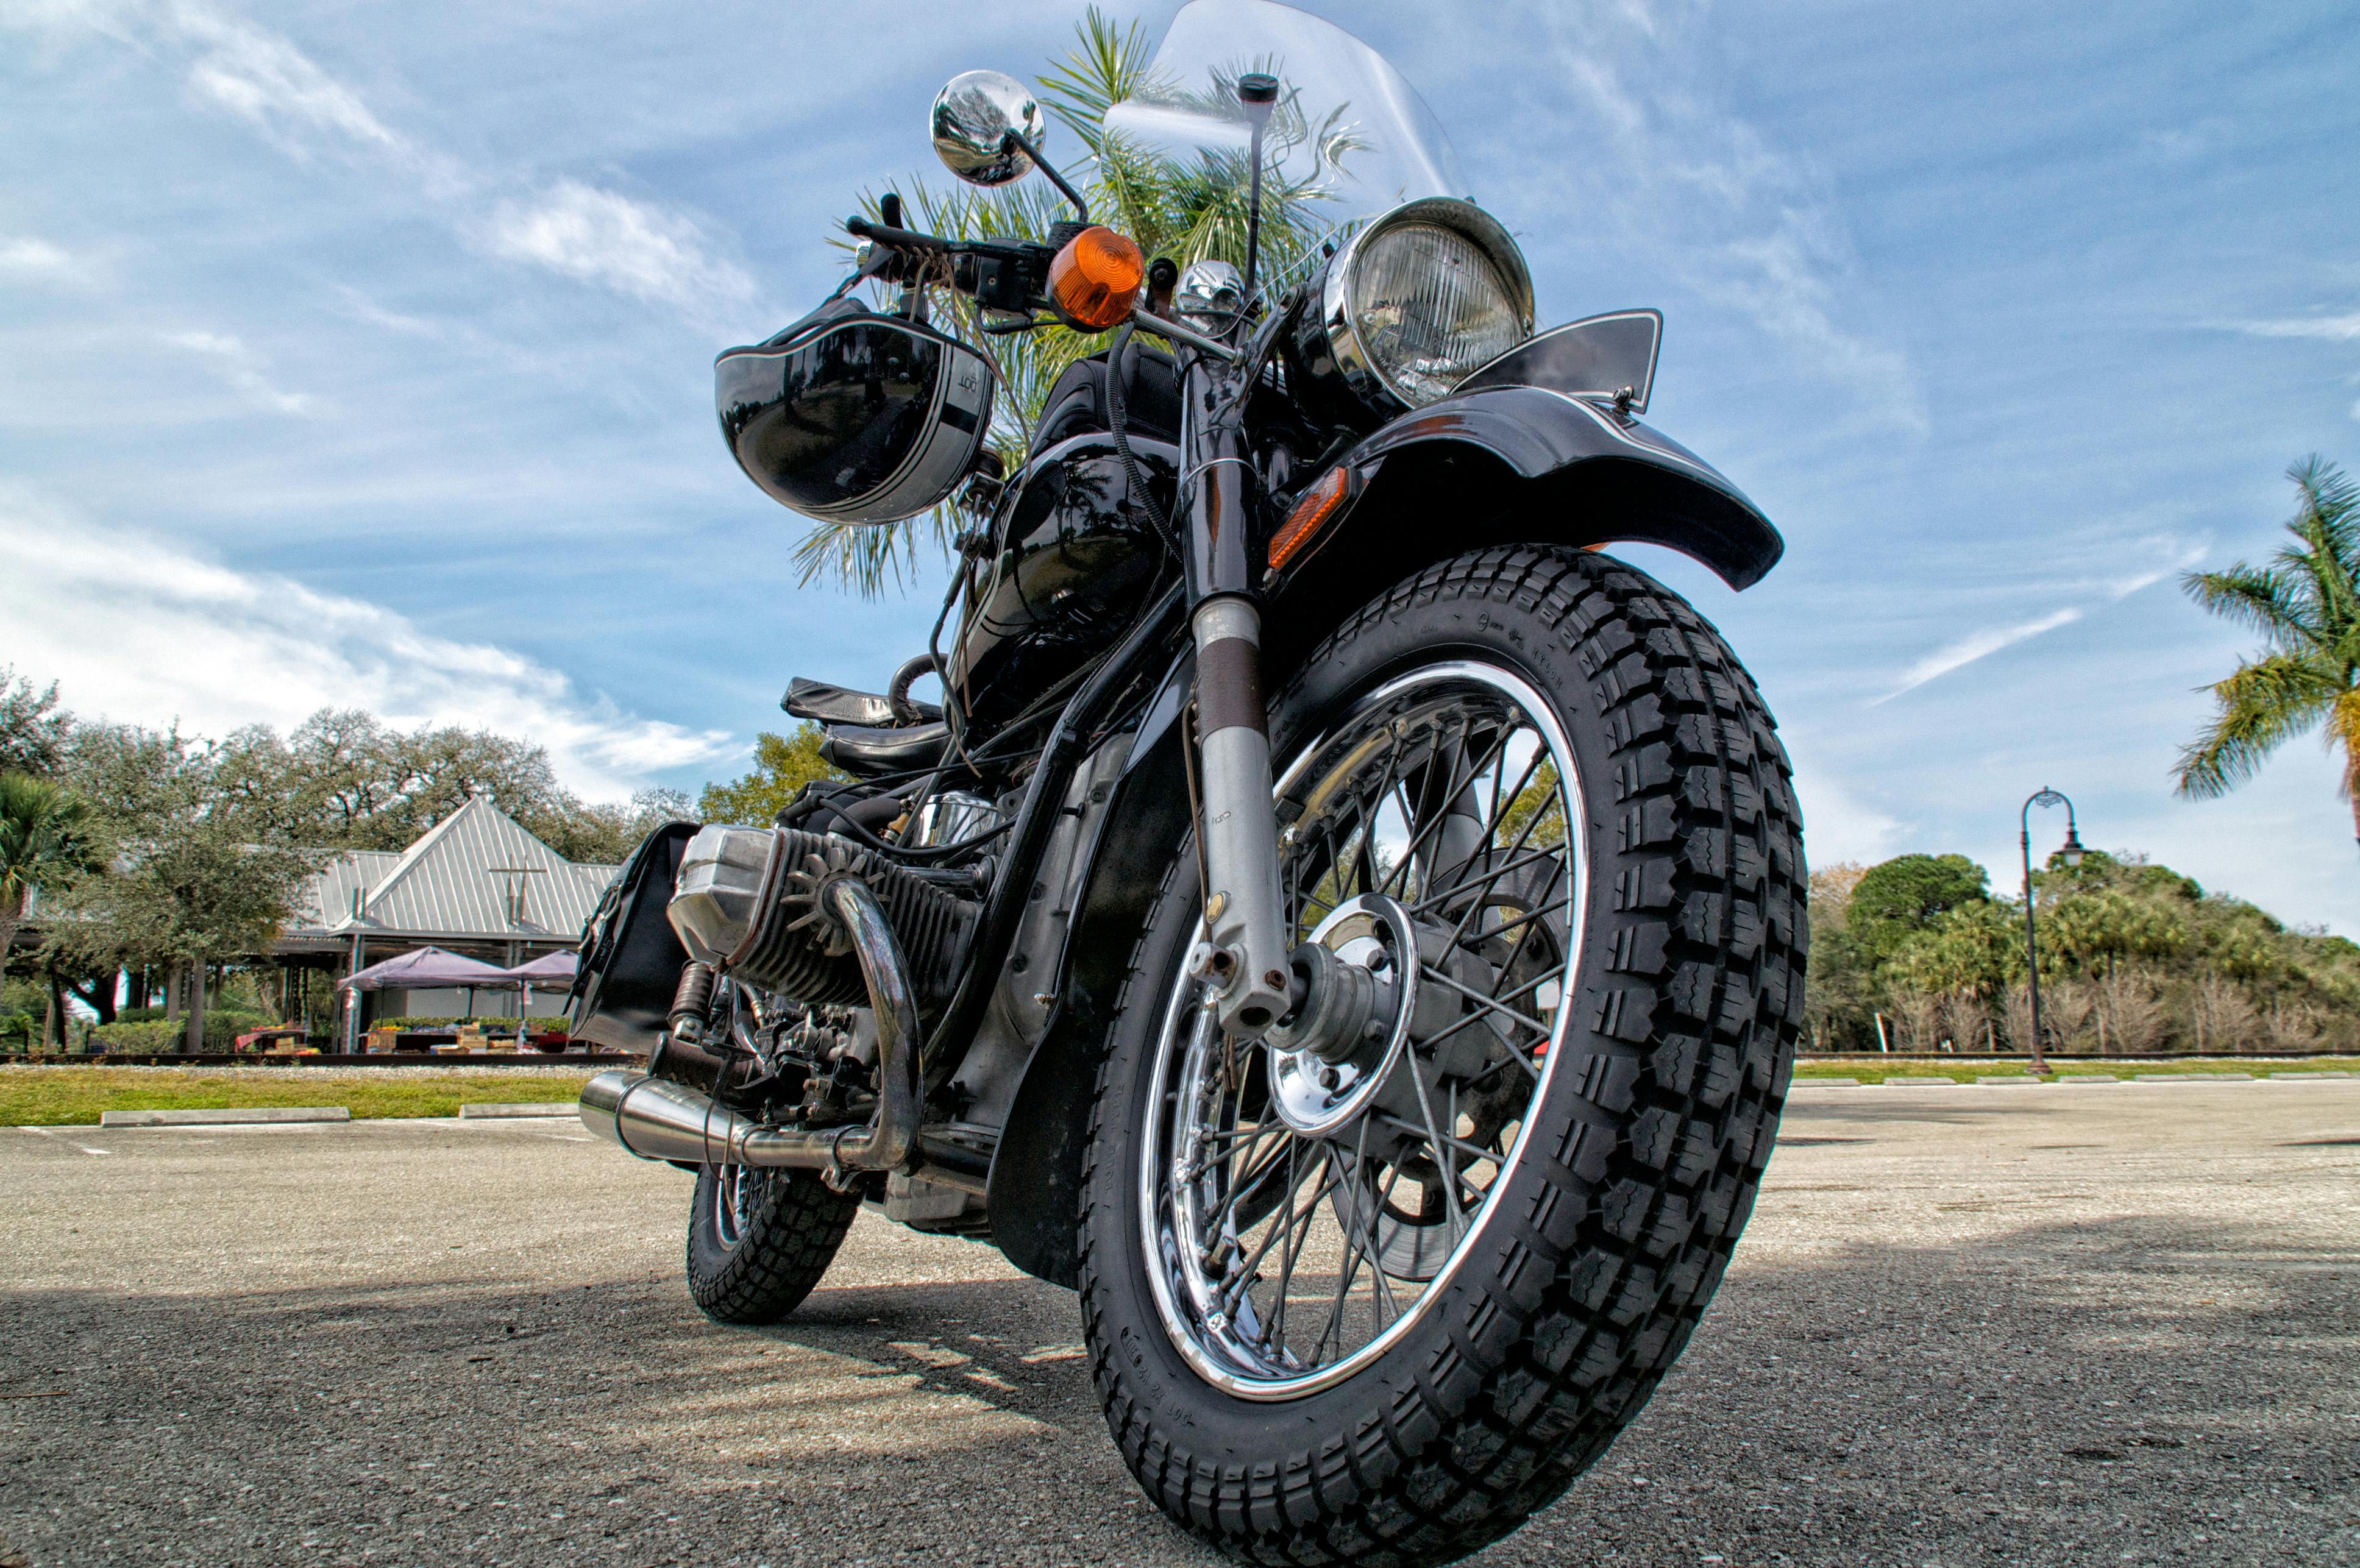 do you need a motorcycle license to rent a motorcycle in Florida?